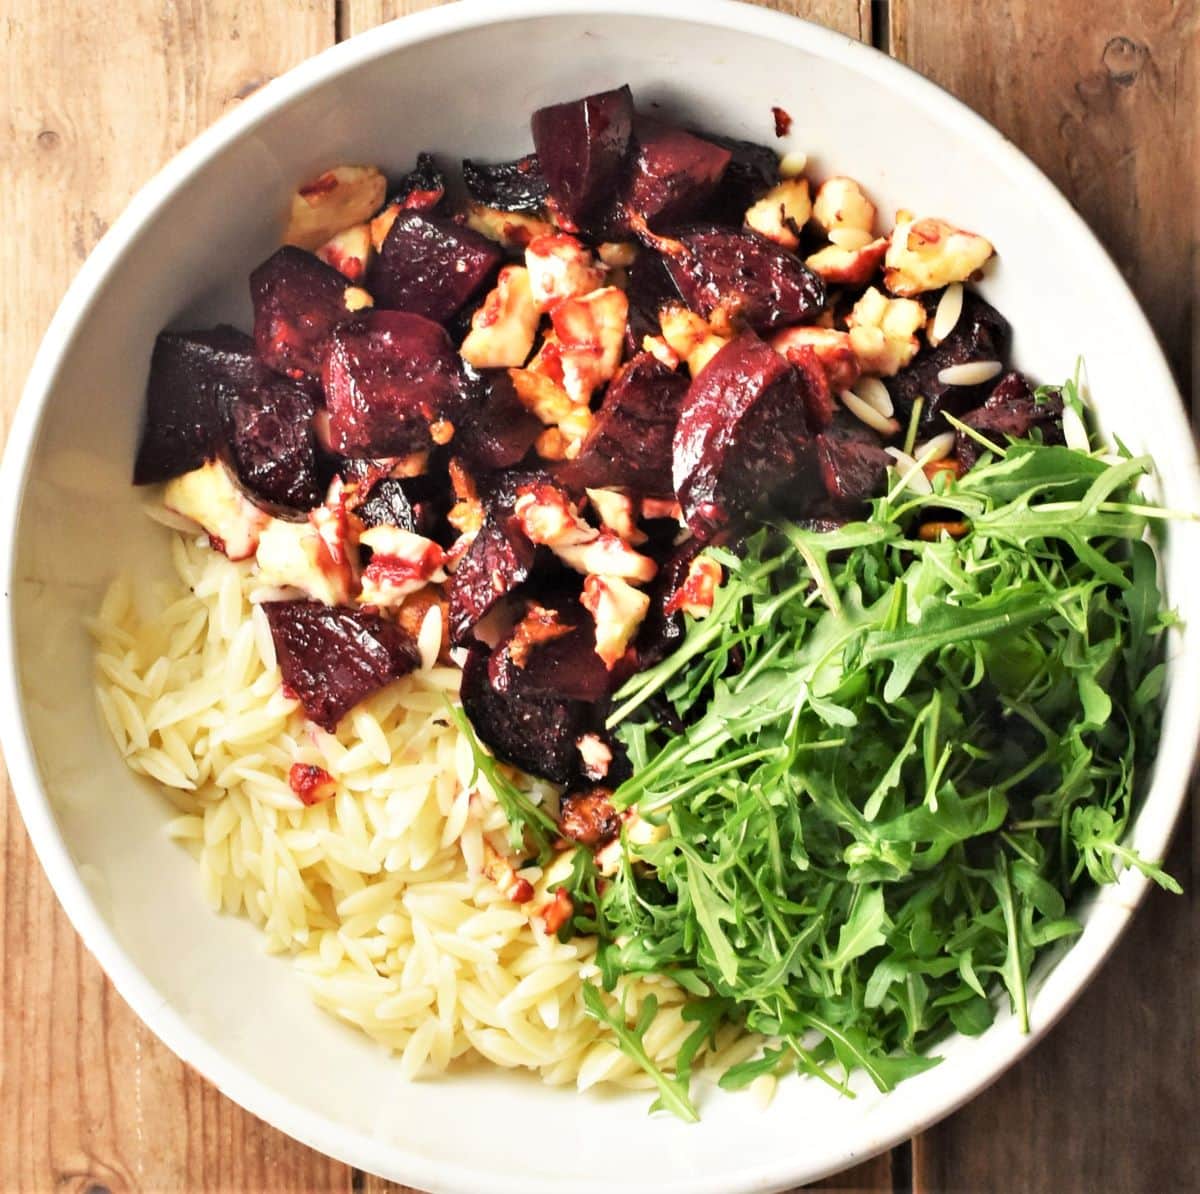 Beetroot, pasta and arugula in large white bowl.